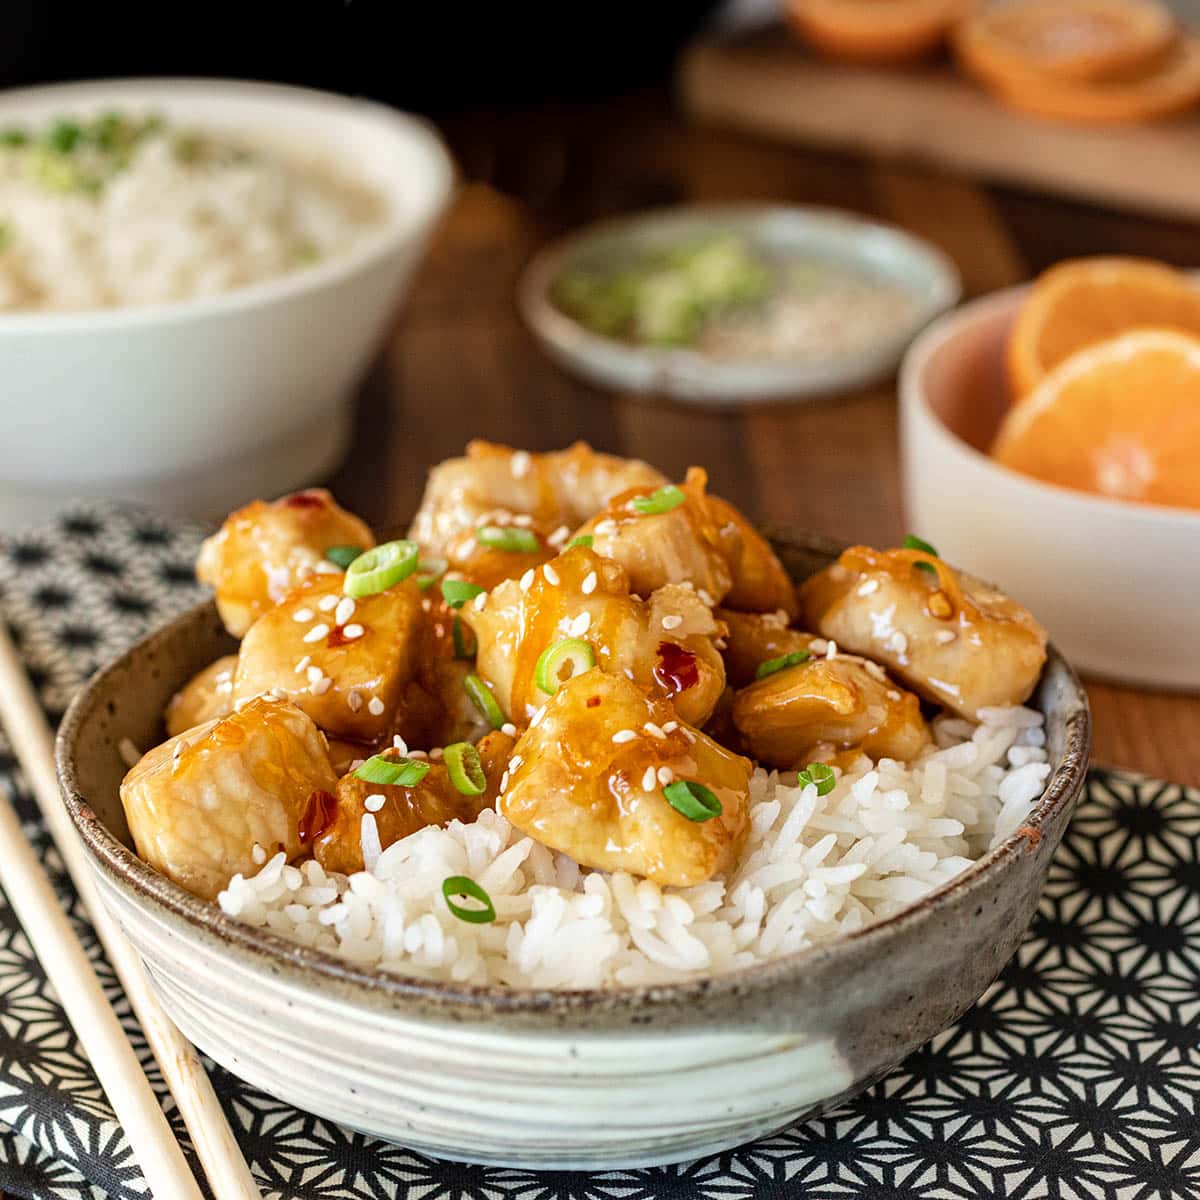 Chicken pieces in orange sauce on rice, topped with sesame seeds and green onion.